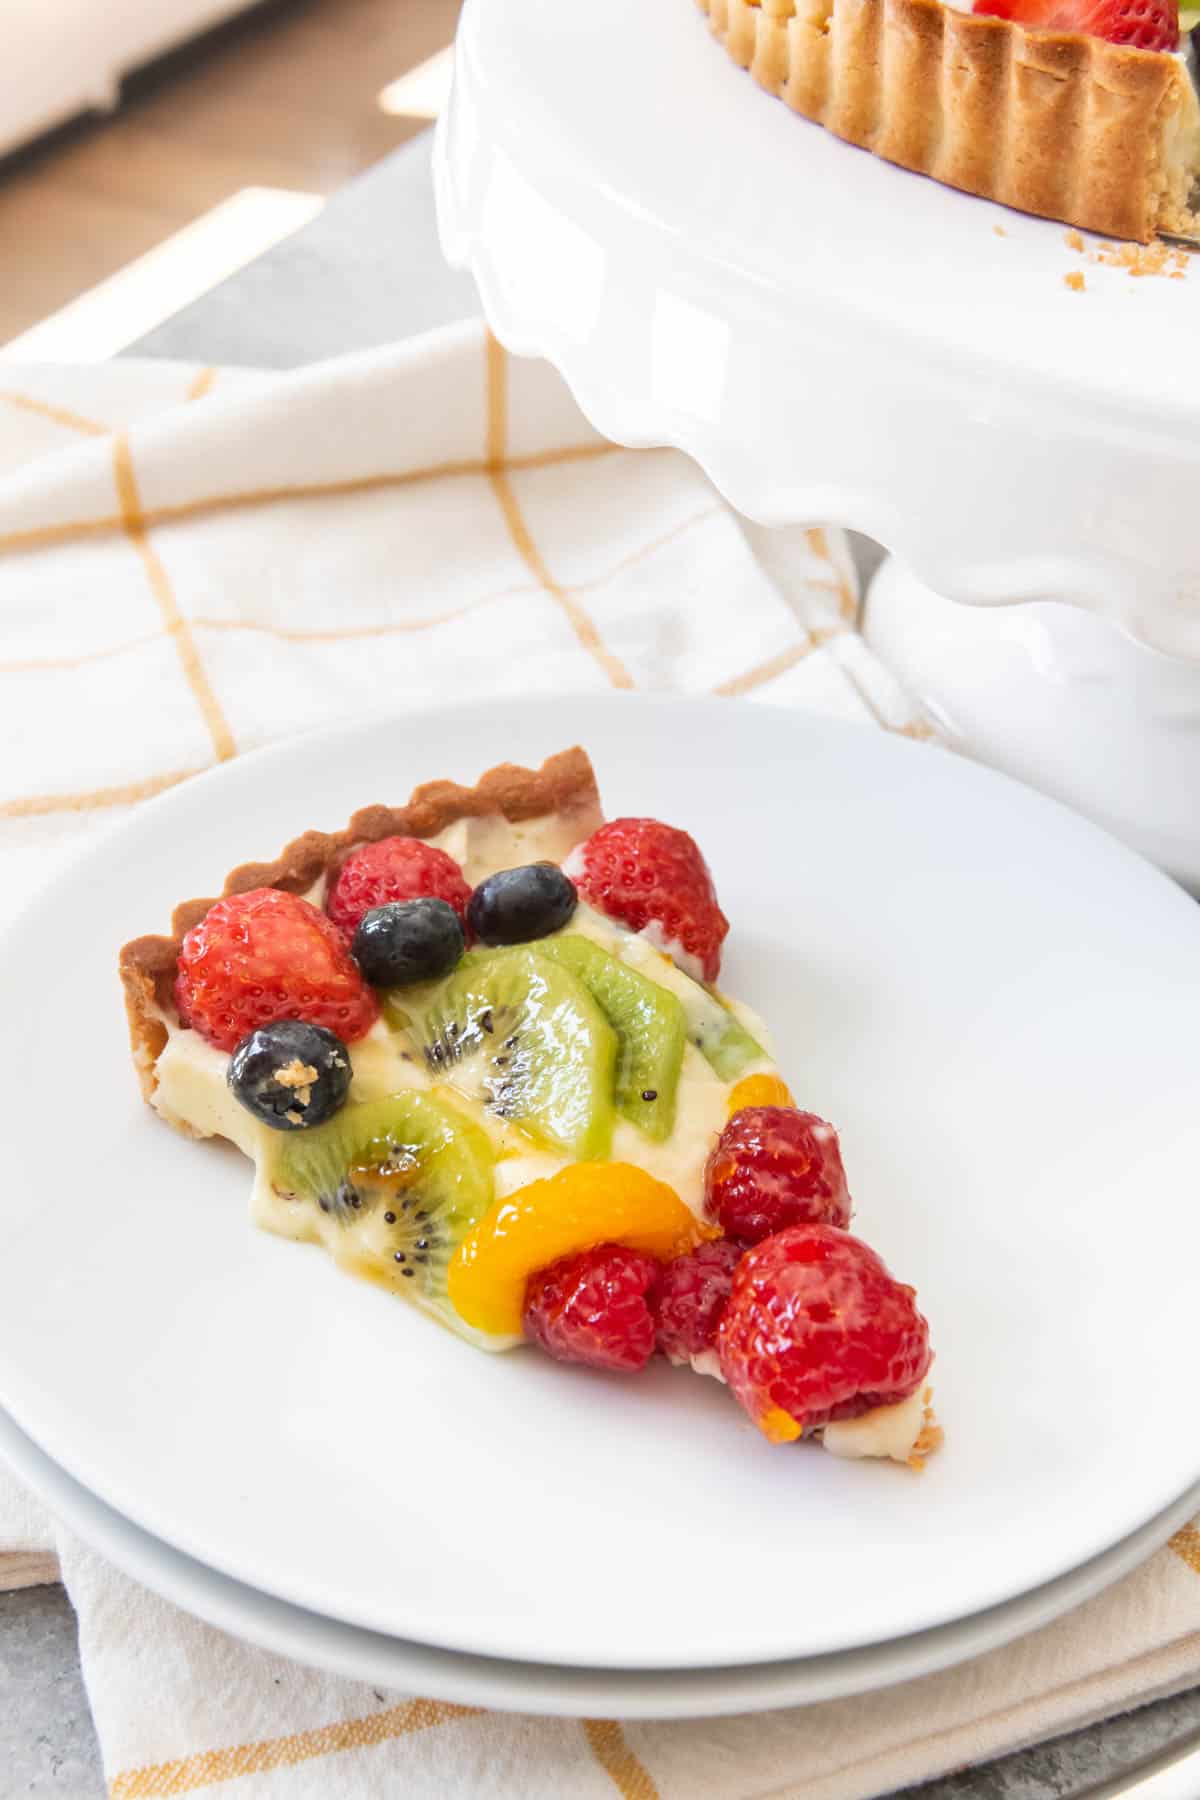 An image of a slice of mixed fruit tart made with pastry cream and a pate sucree sweet pastry crust.